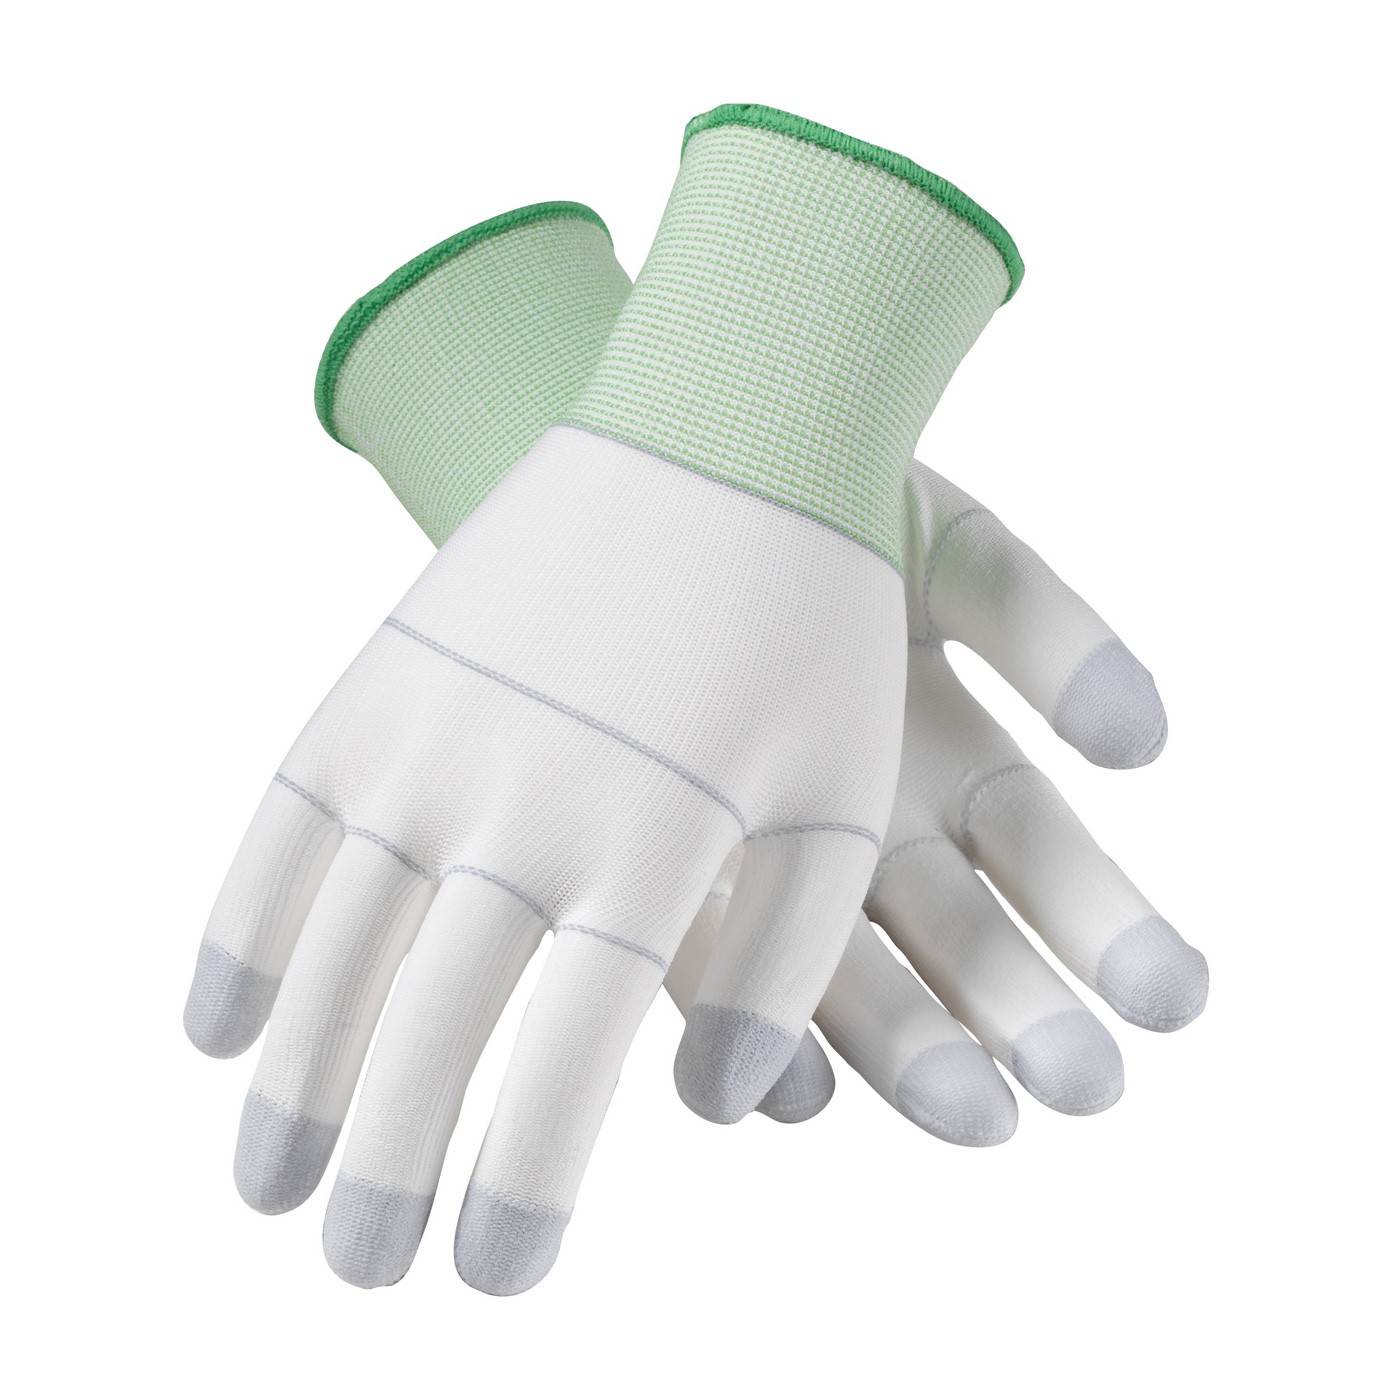 CleanTeam Nylon w/PU Coating on Palm and Finger Tips Size 2X-Large